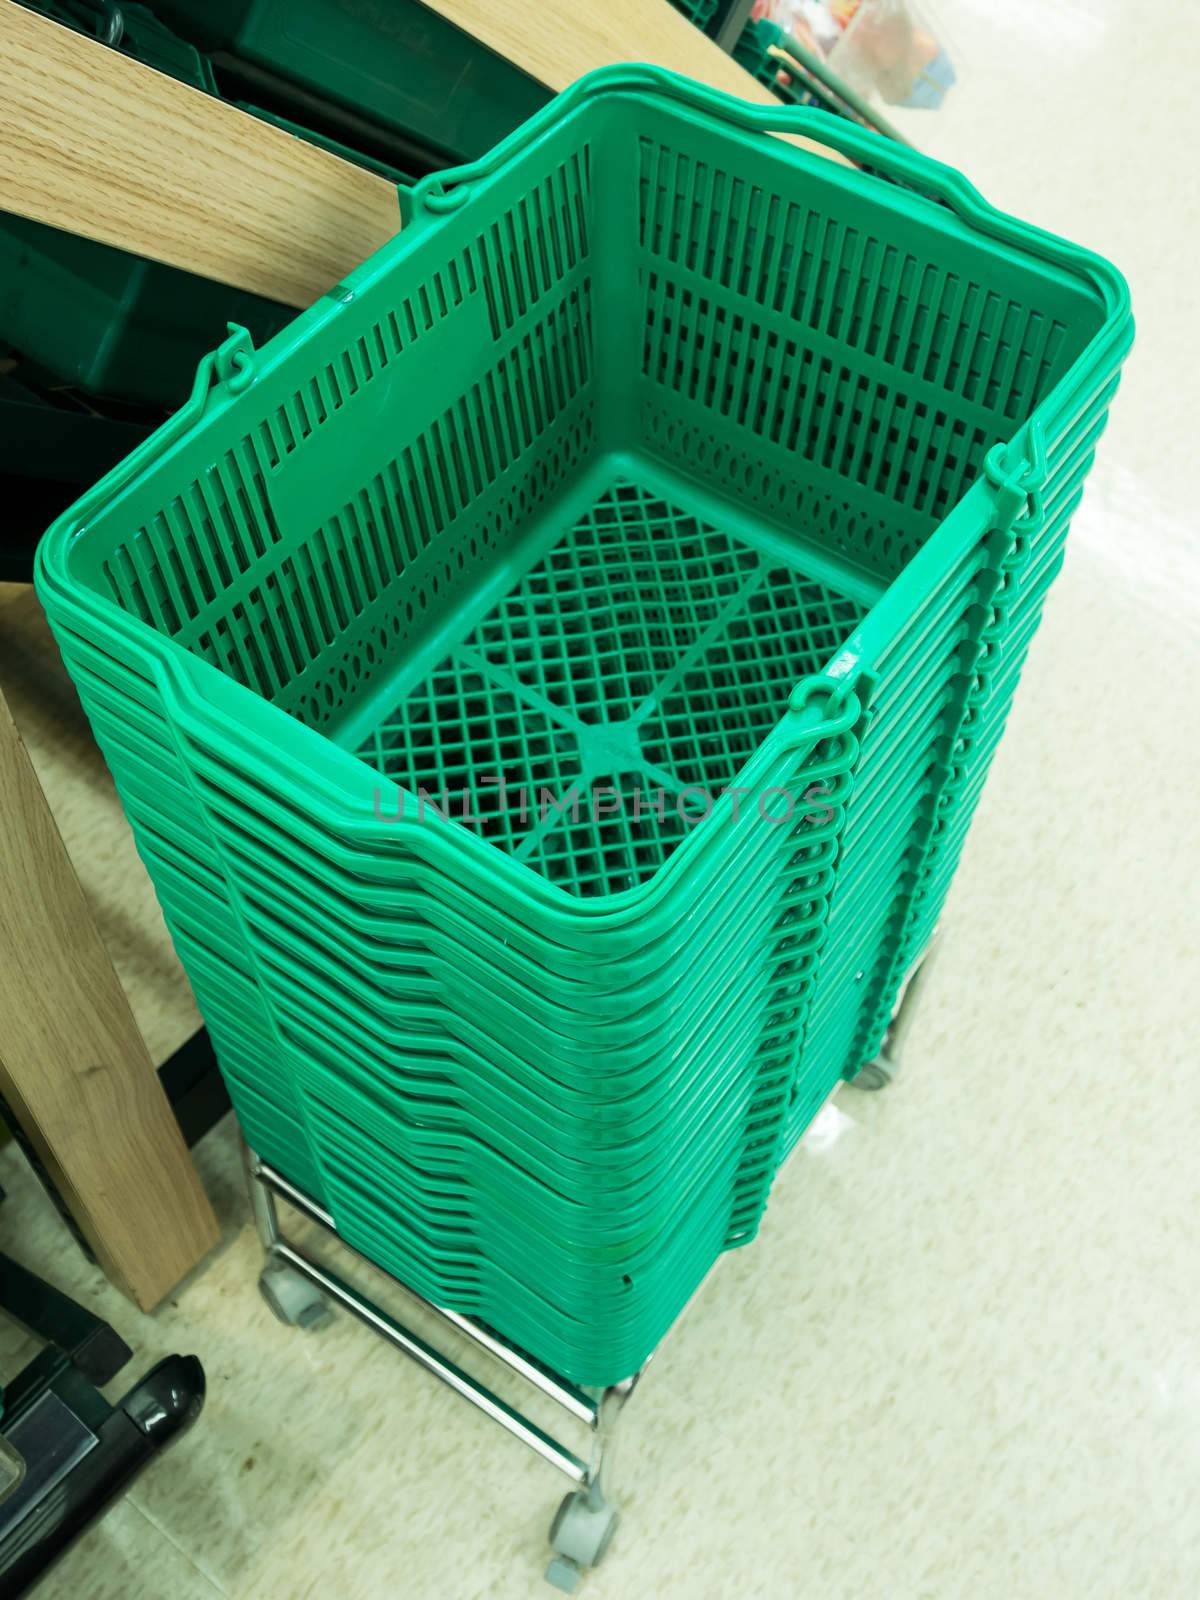 This is green shopping baskets in supermarket.